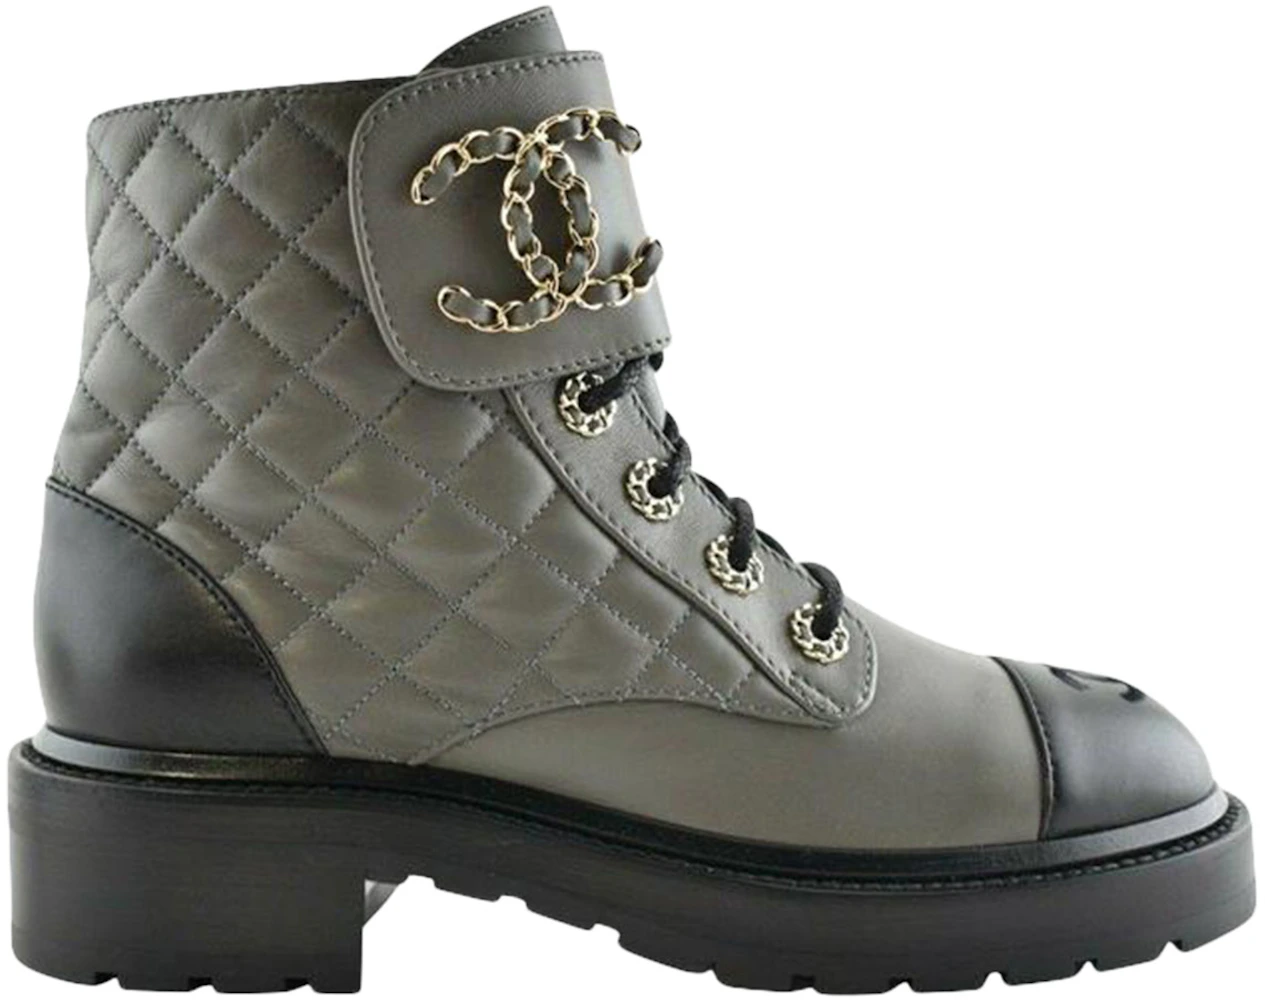 Chanel Combat Boots G45125 B14006 NR231, Green, 40